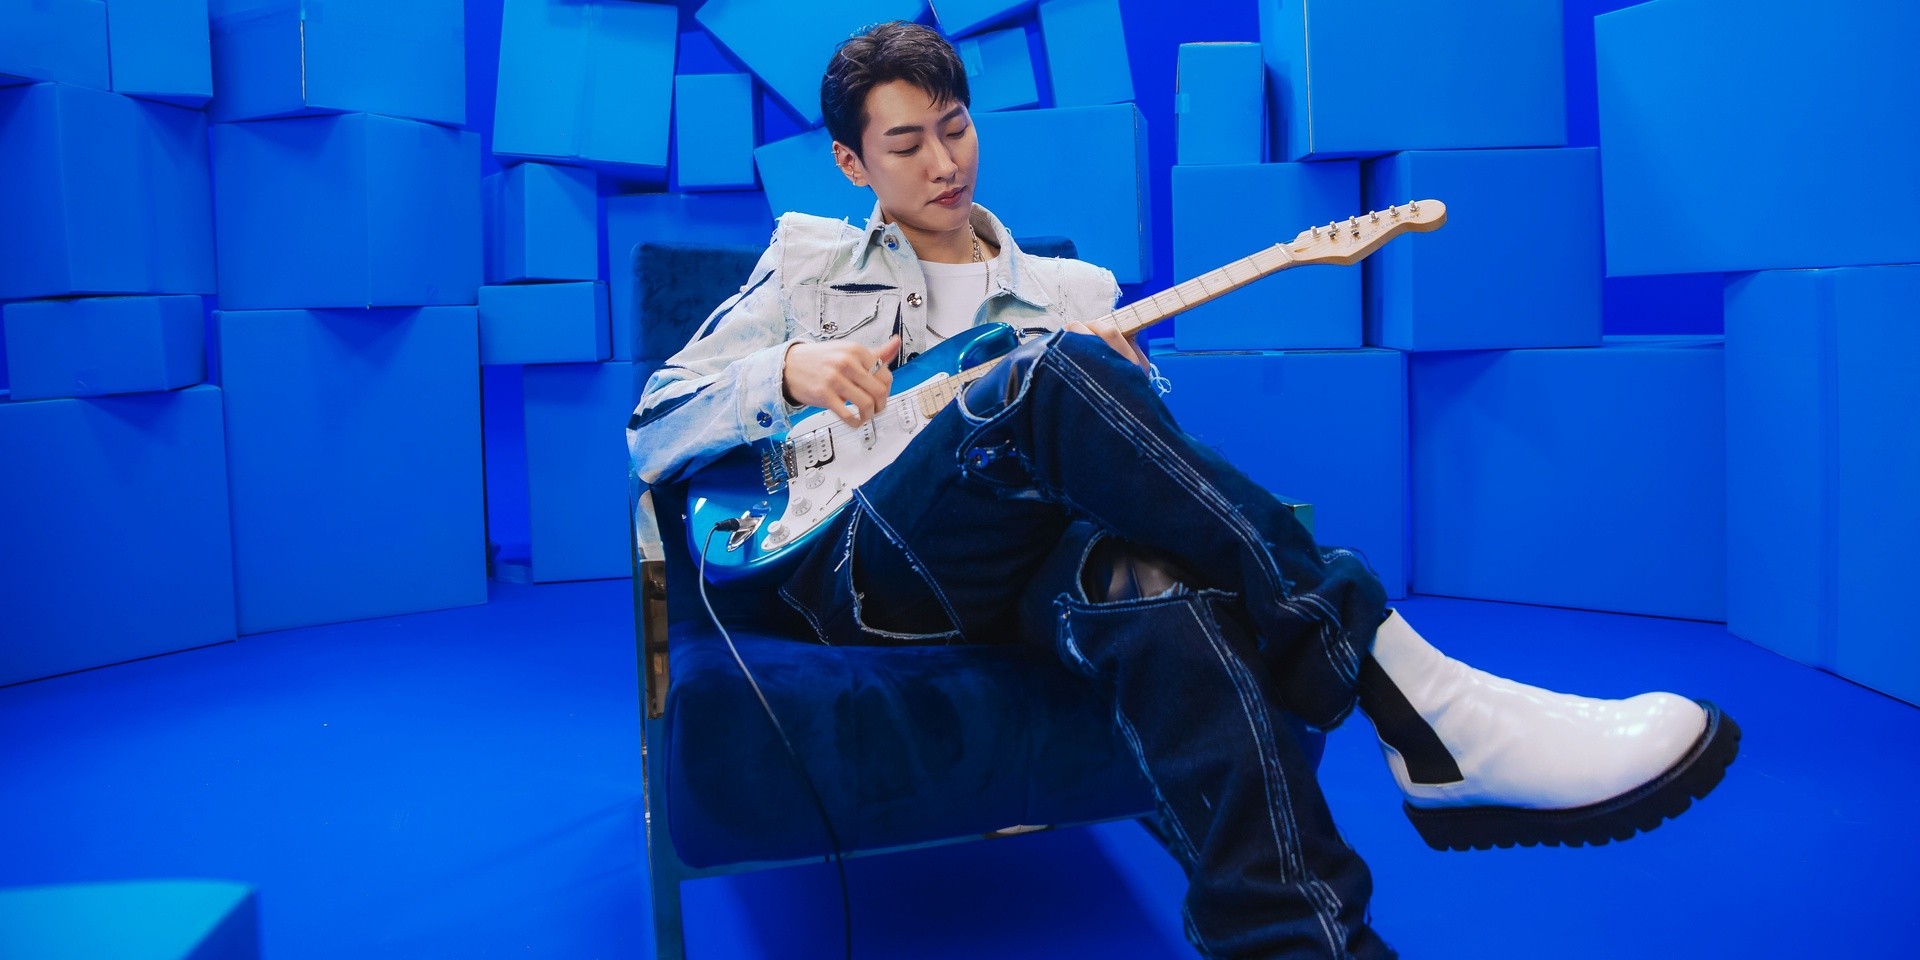 'Way Back Home' sensation SHAUN on his latest project '#0055b7': "I just want to continue pursuing music happily for a long, long time"